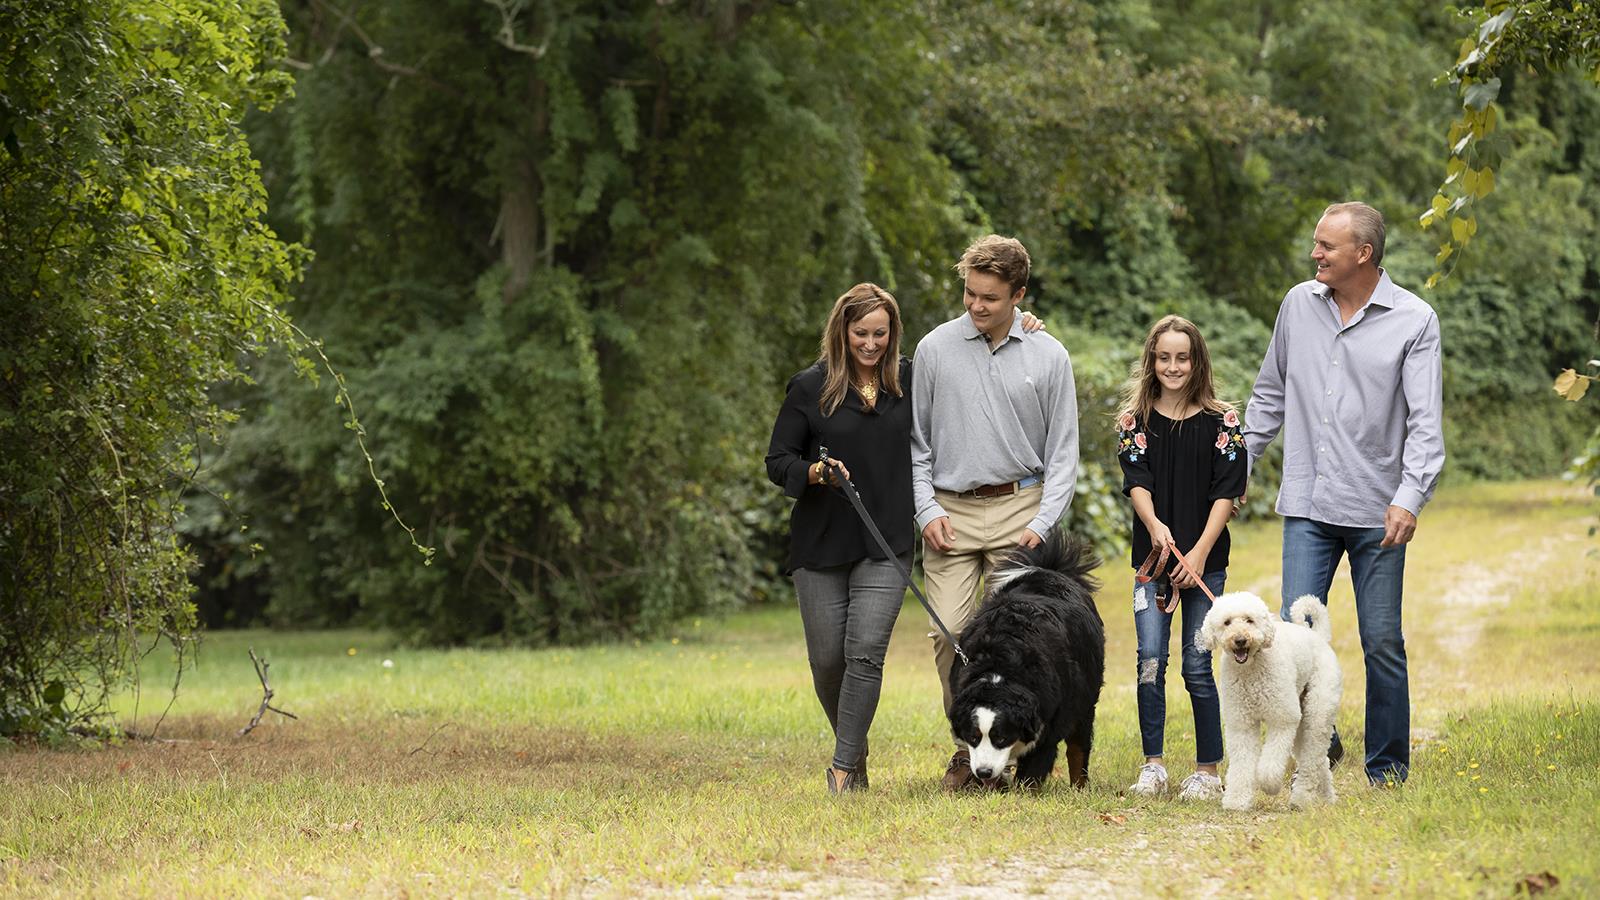 Logan and his family walking their dogs